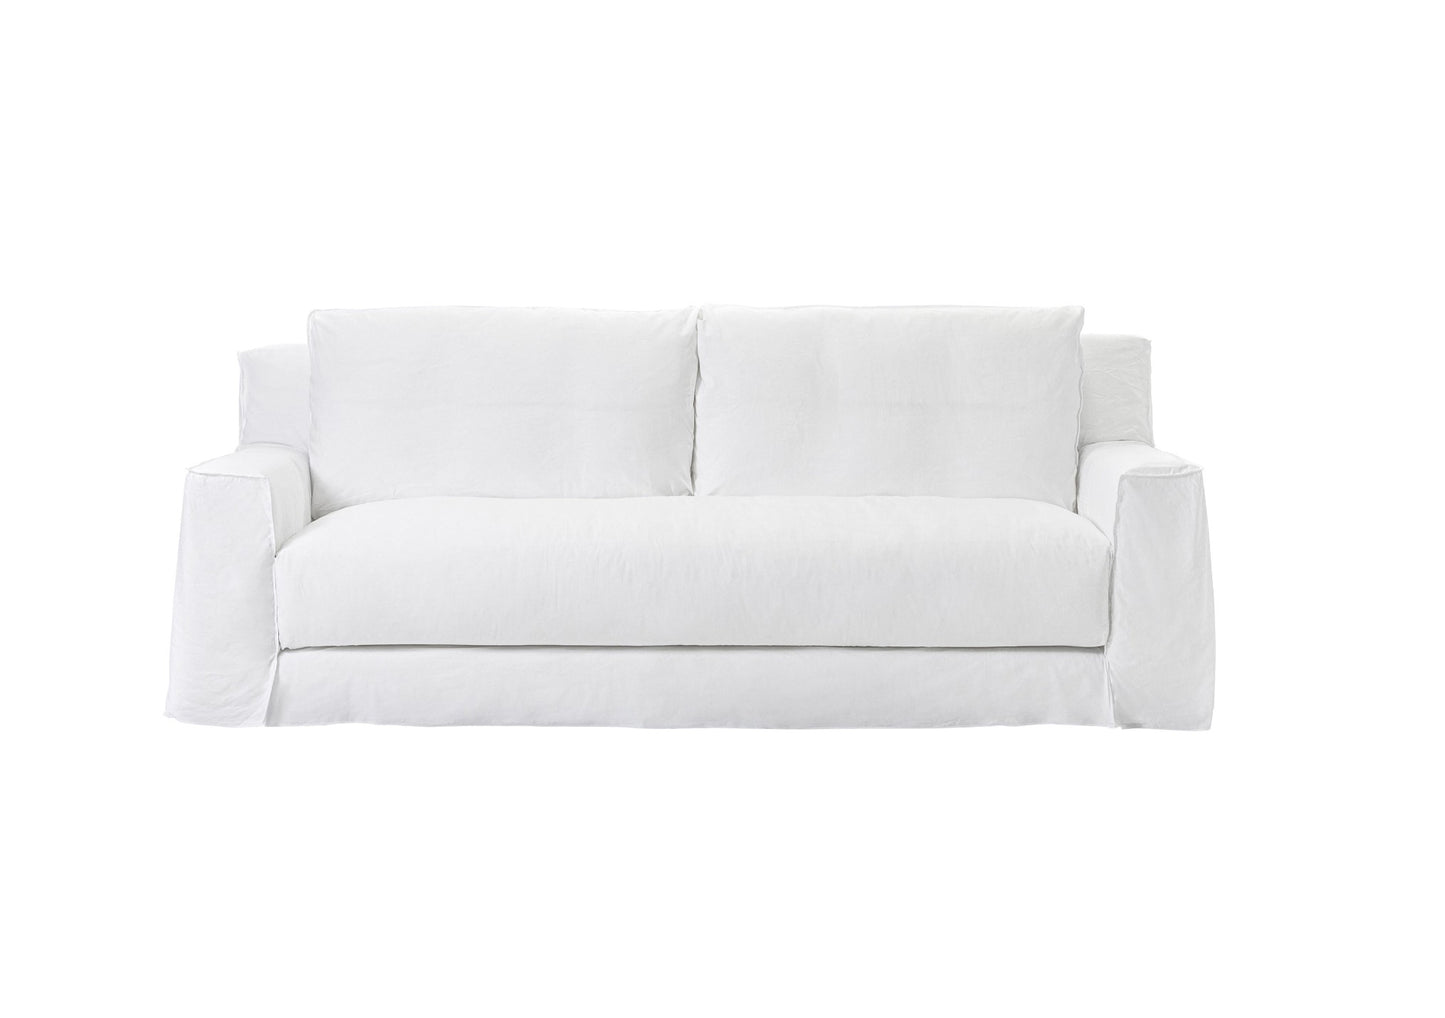 Gervasoni Loll 12 Sofa in White Linen Upholstery by Paola Navone - $7,750.00